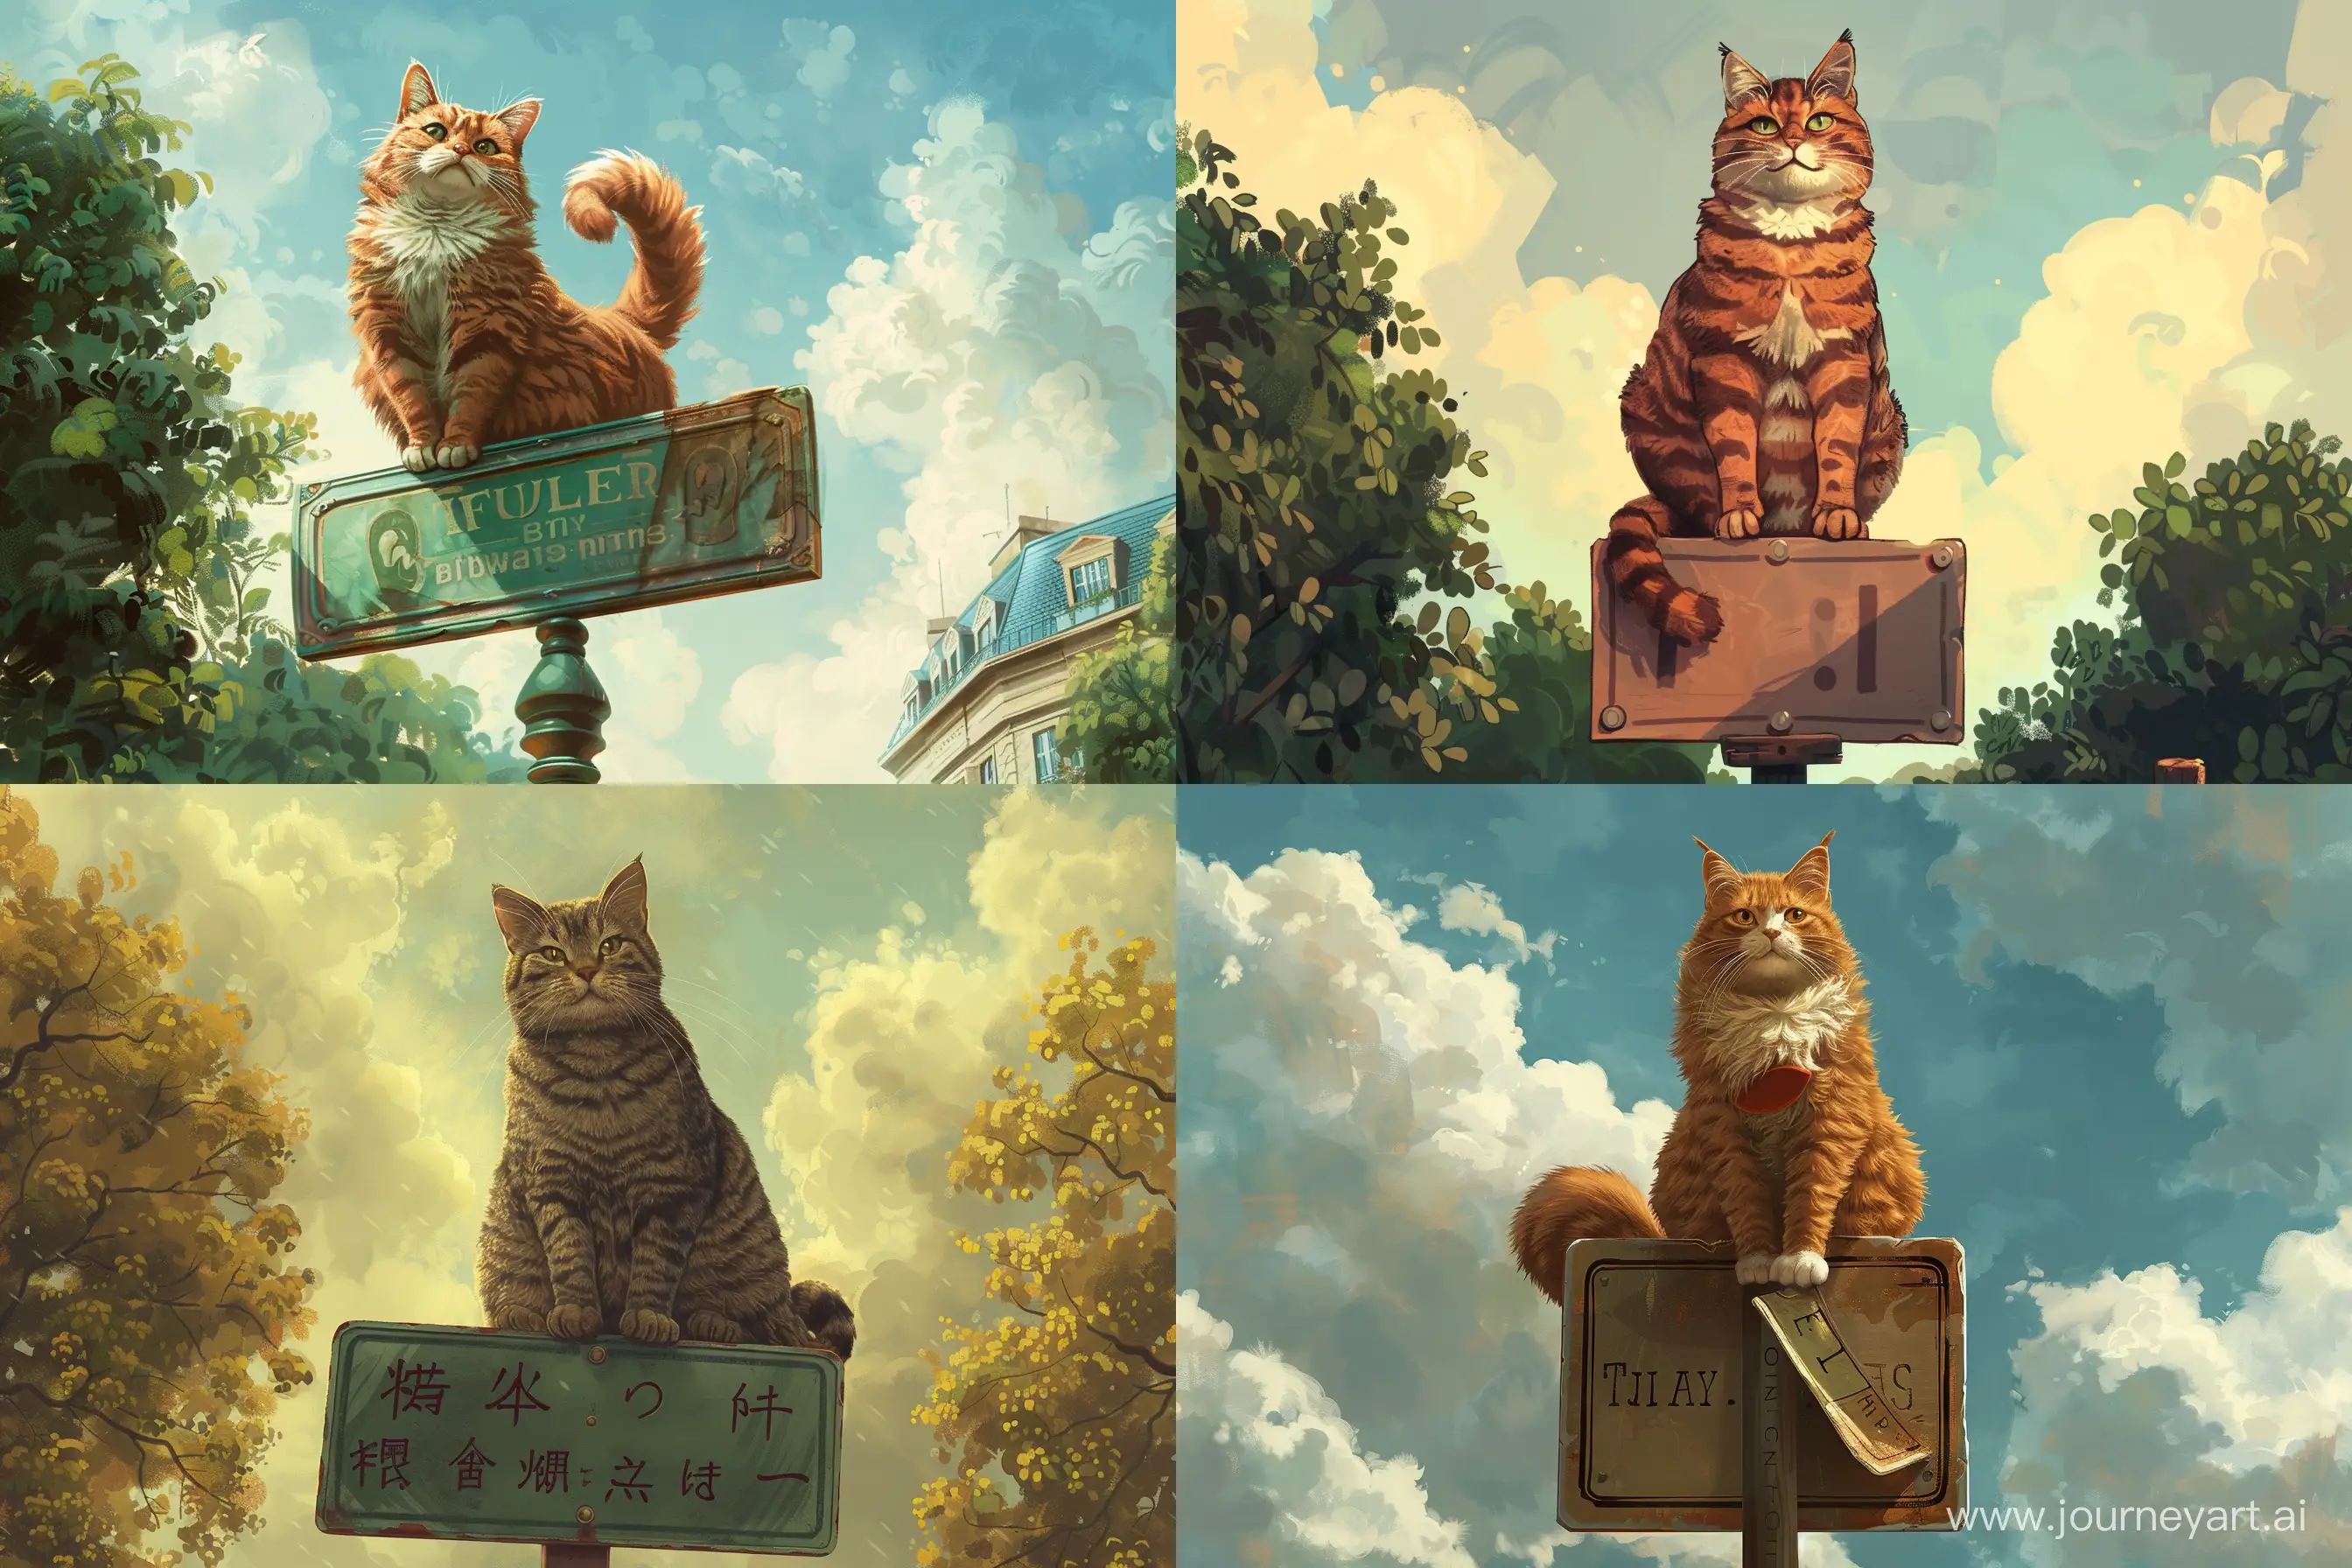 Adorable-Cat-Perched-on-a-Sign-Charming-Storybook-Illustration